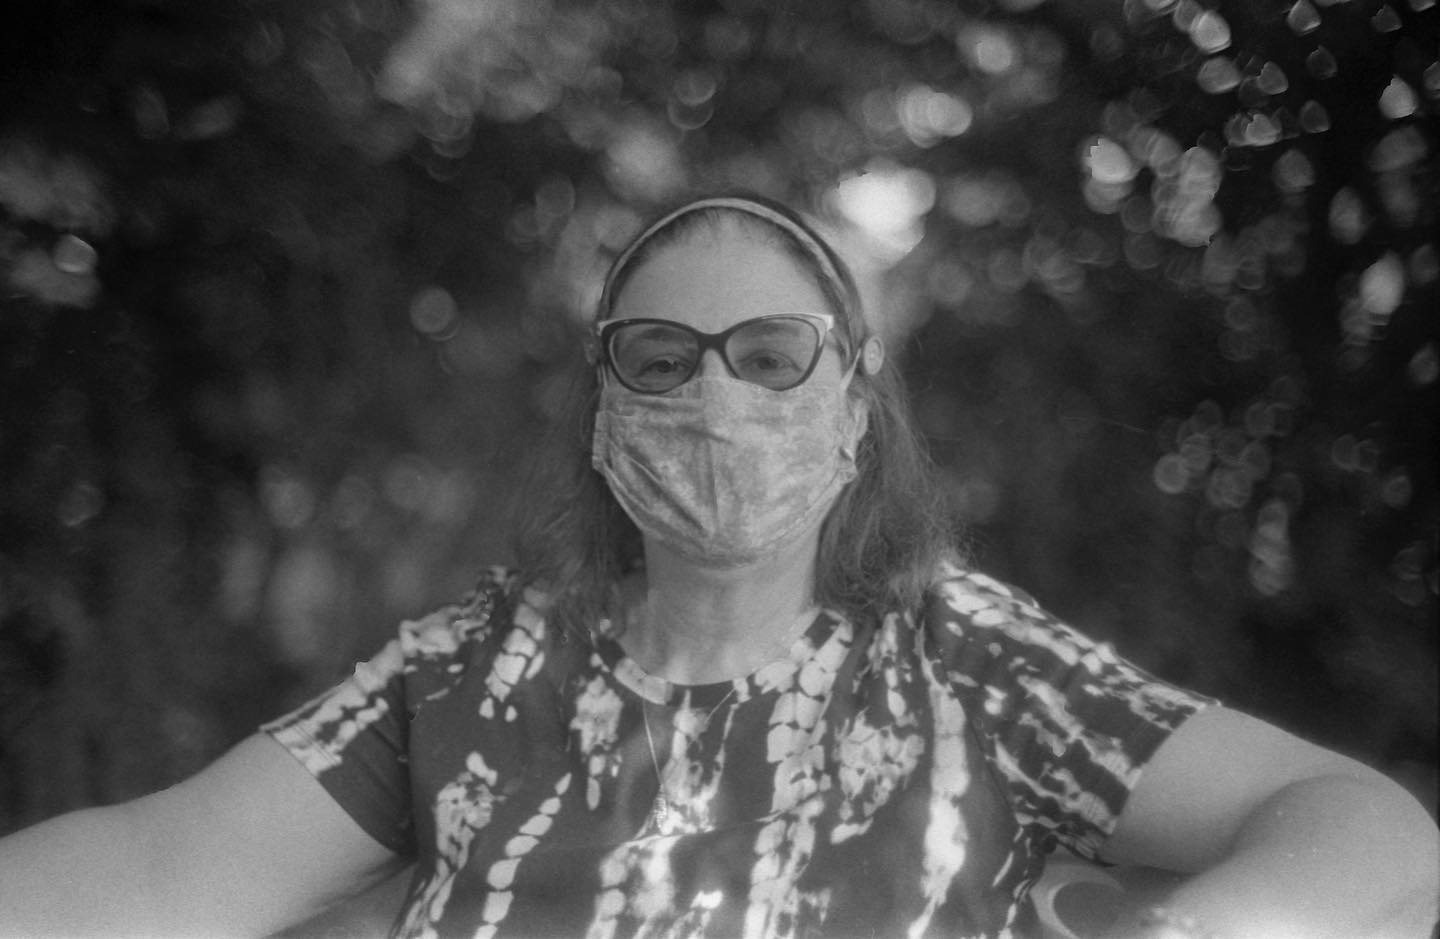 Wifey in mask. Visiting her father, properly socially distancing in the back yard. #rollfilmweek #rollfilmweek2020 #film #filmphotography #contaxiii #eastman5222